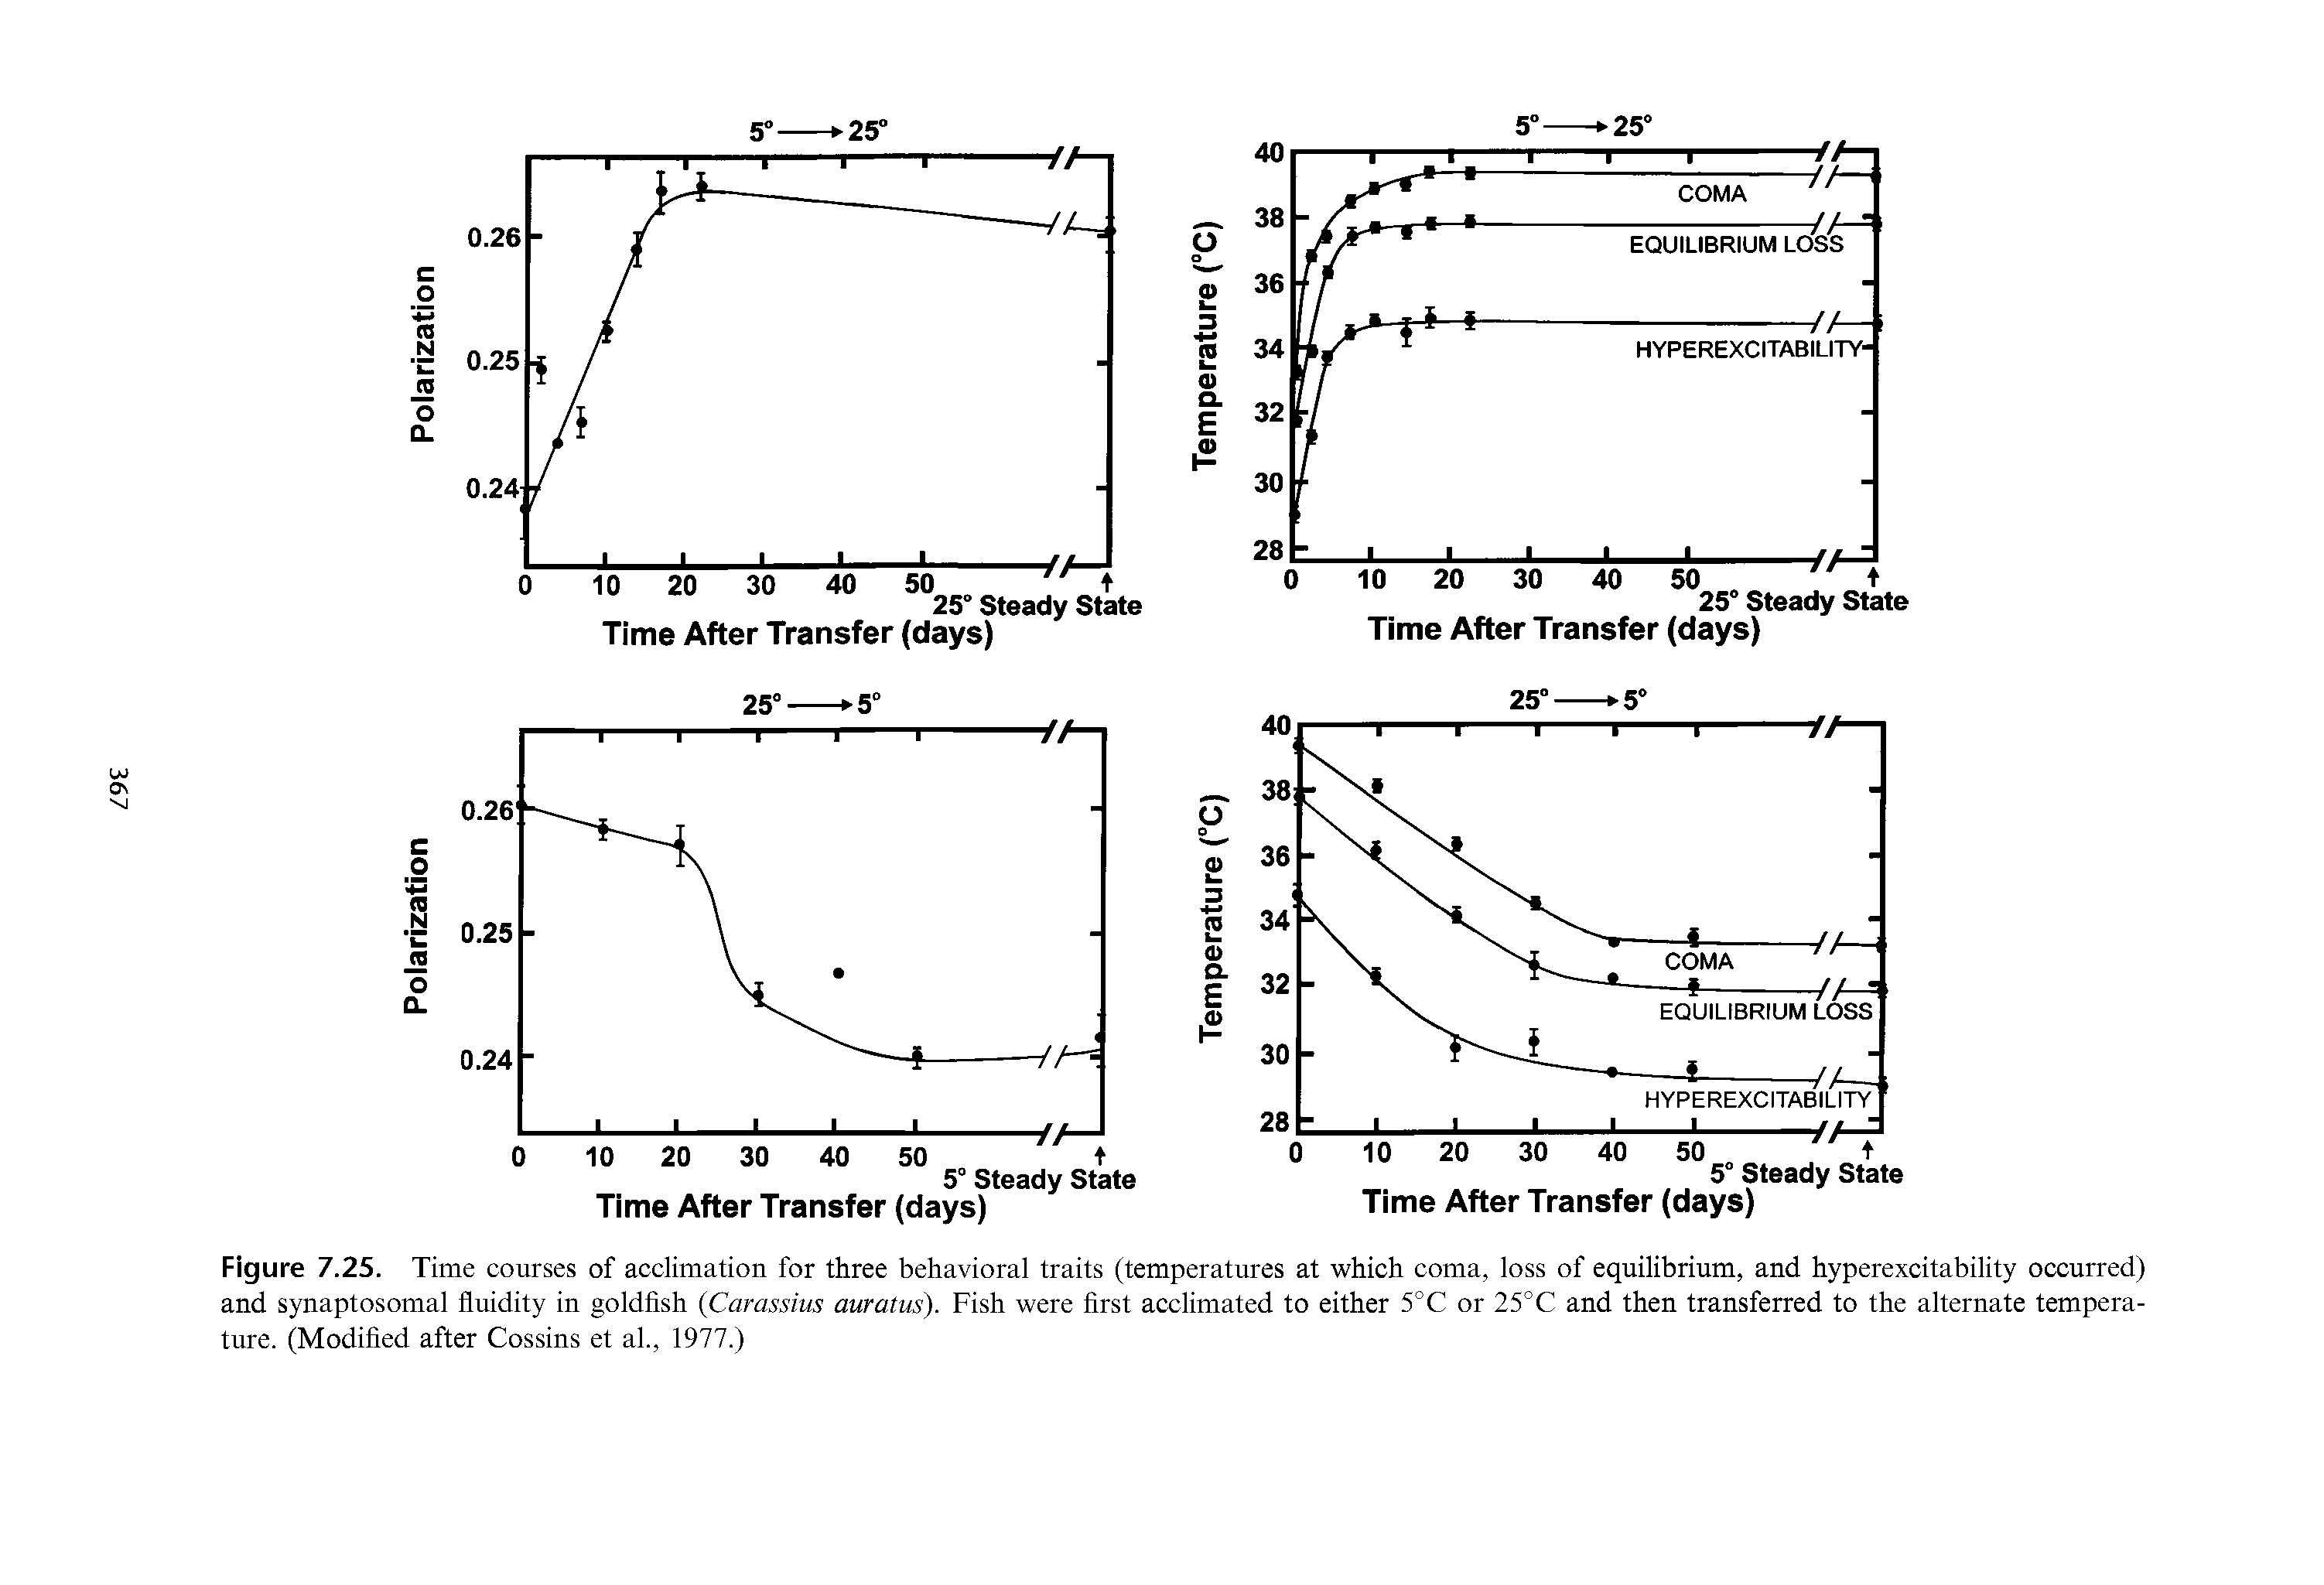 Figure 7.25. Time courses of acclimation for three behavioral traits (temperatures at which coma, loss of equilibrium, and hyperexcitability occurred) and synaptosomal fluidity in goldfish (Carassius auratus). Fish were first acclimated to either 5°C or 25°C and then transferred to the alternate temperature. (Modified after Cossins et al., 1977.)...